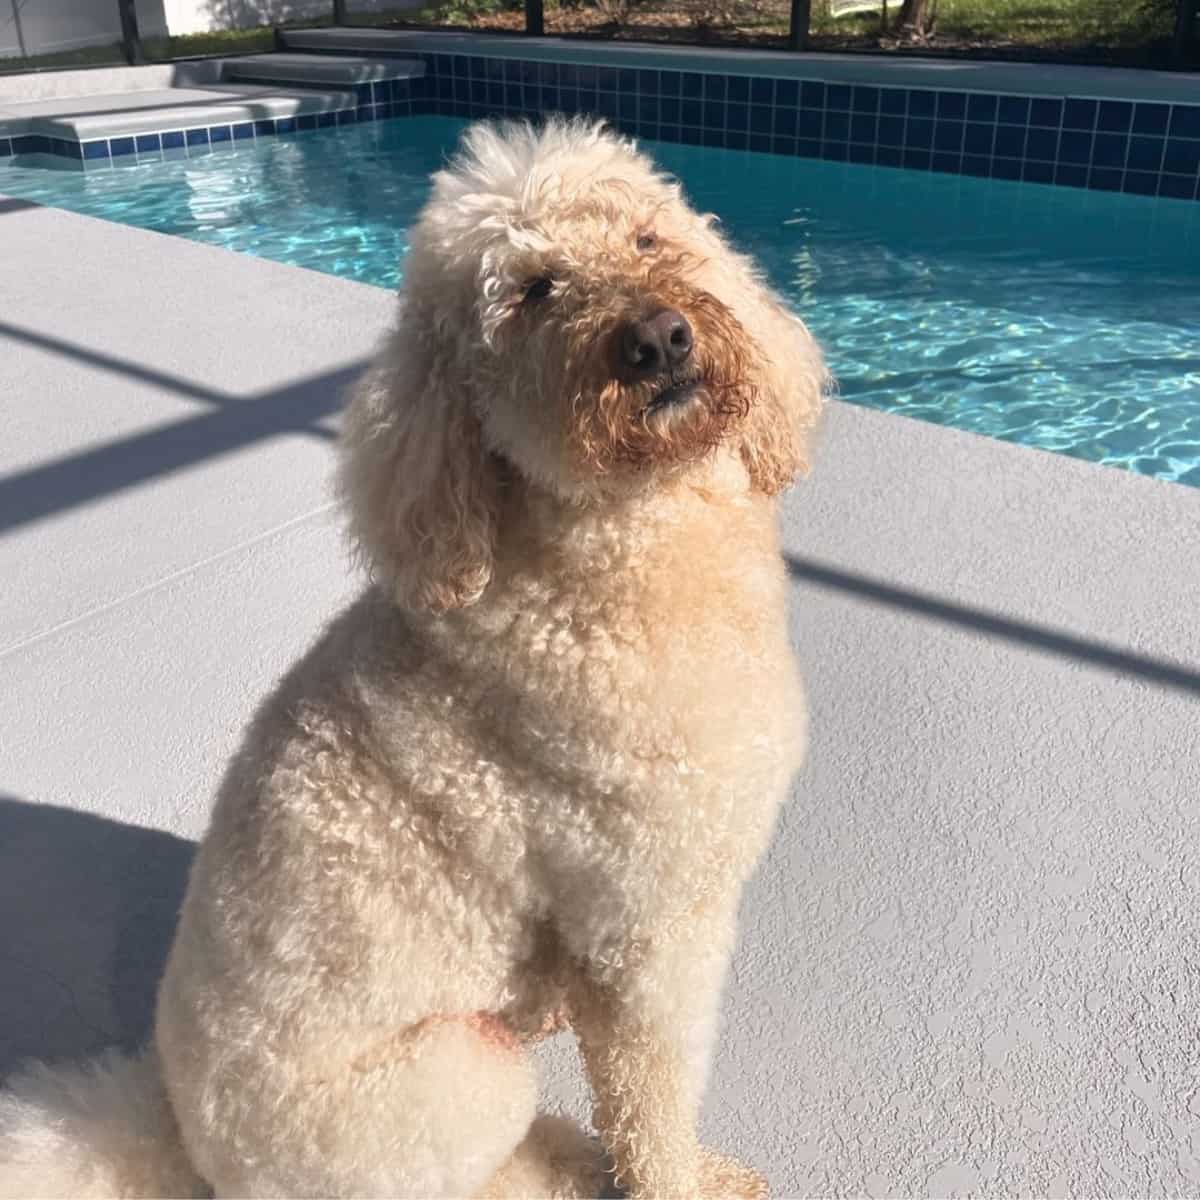 grown-up Goldendoodle by the pool